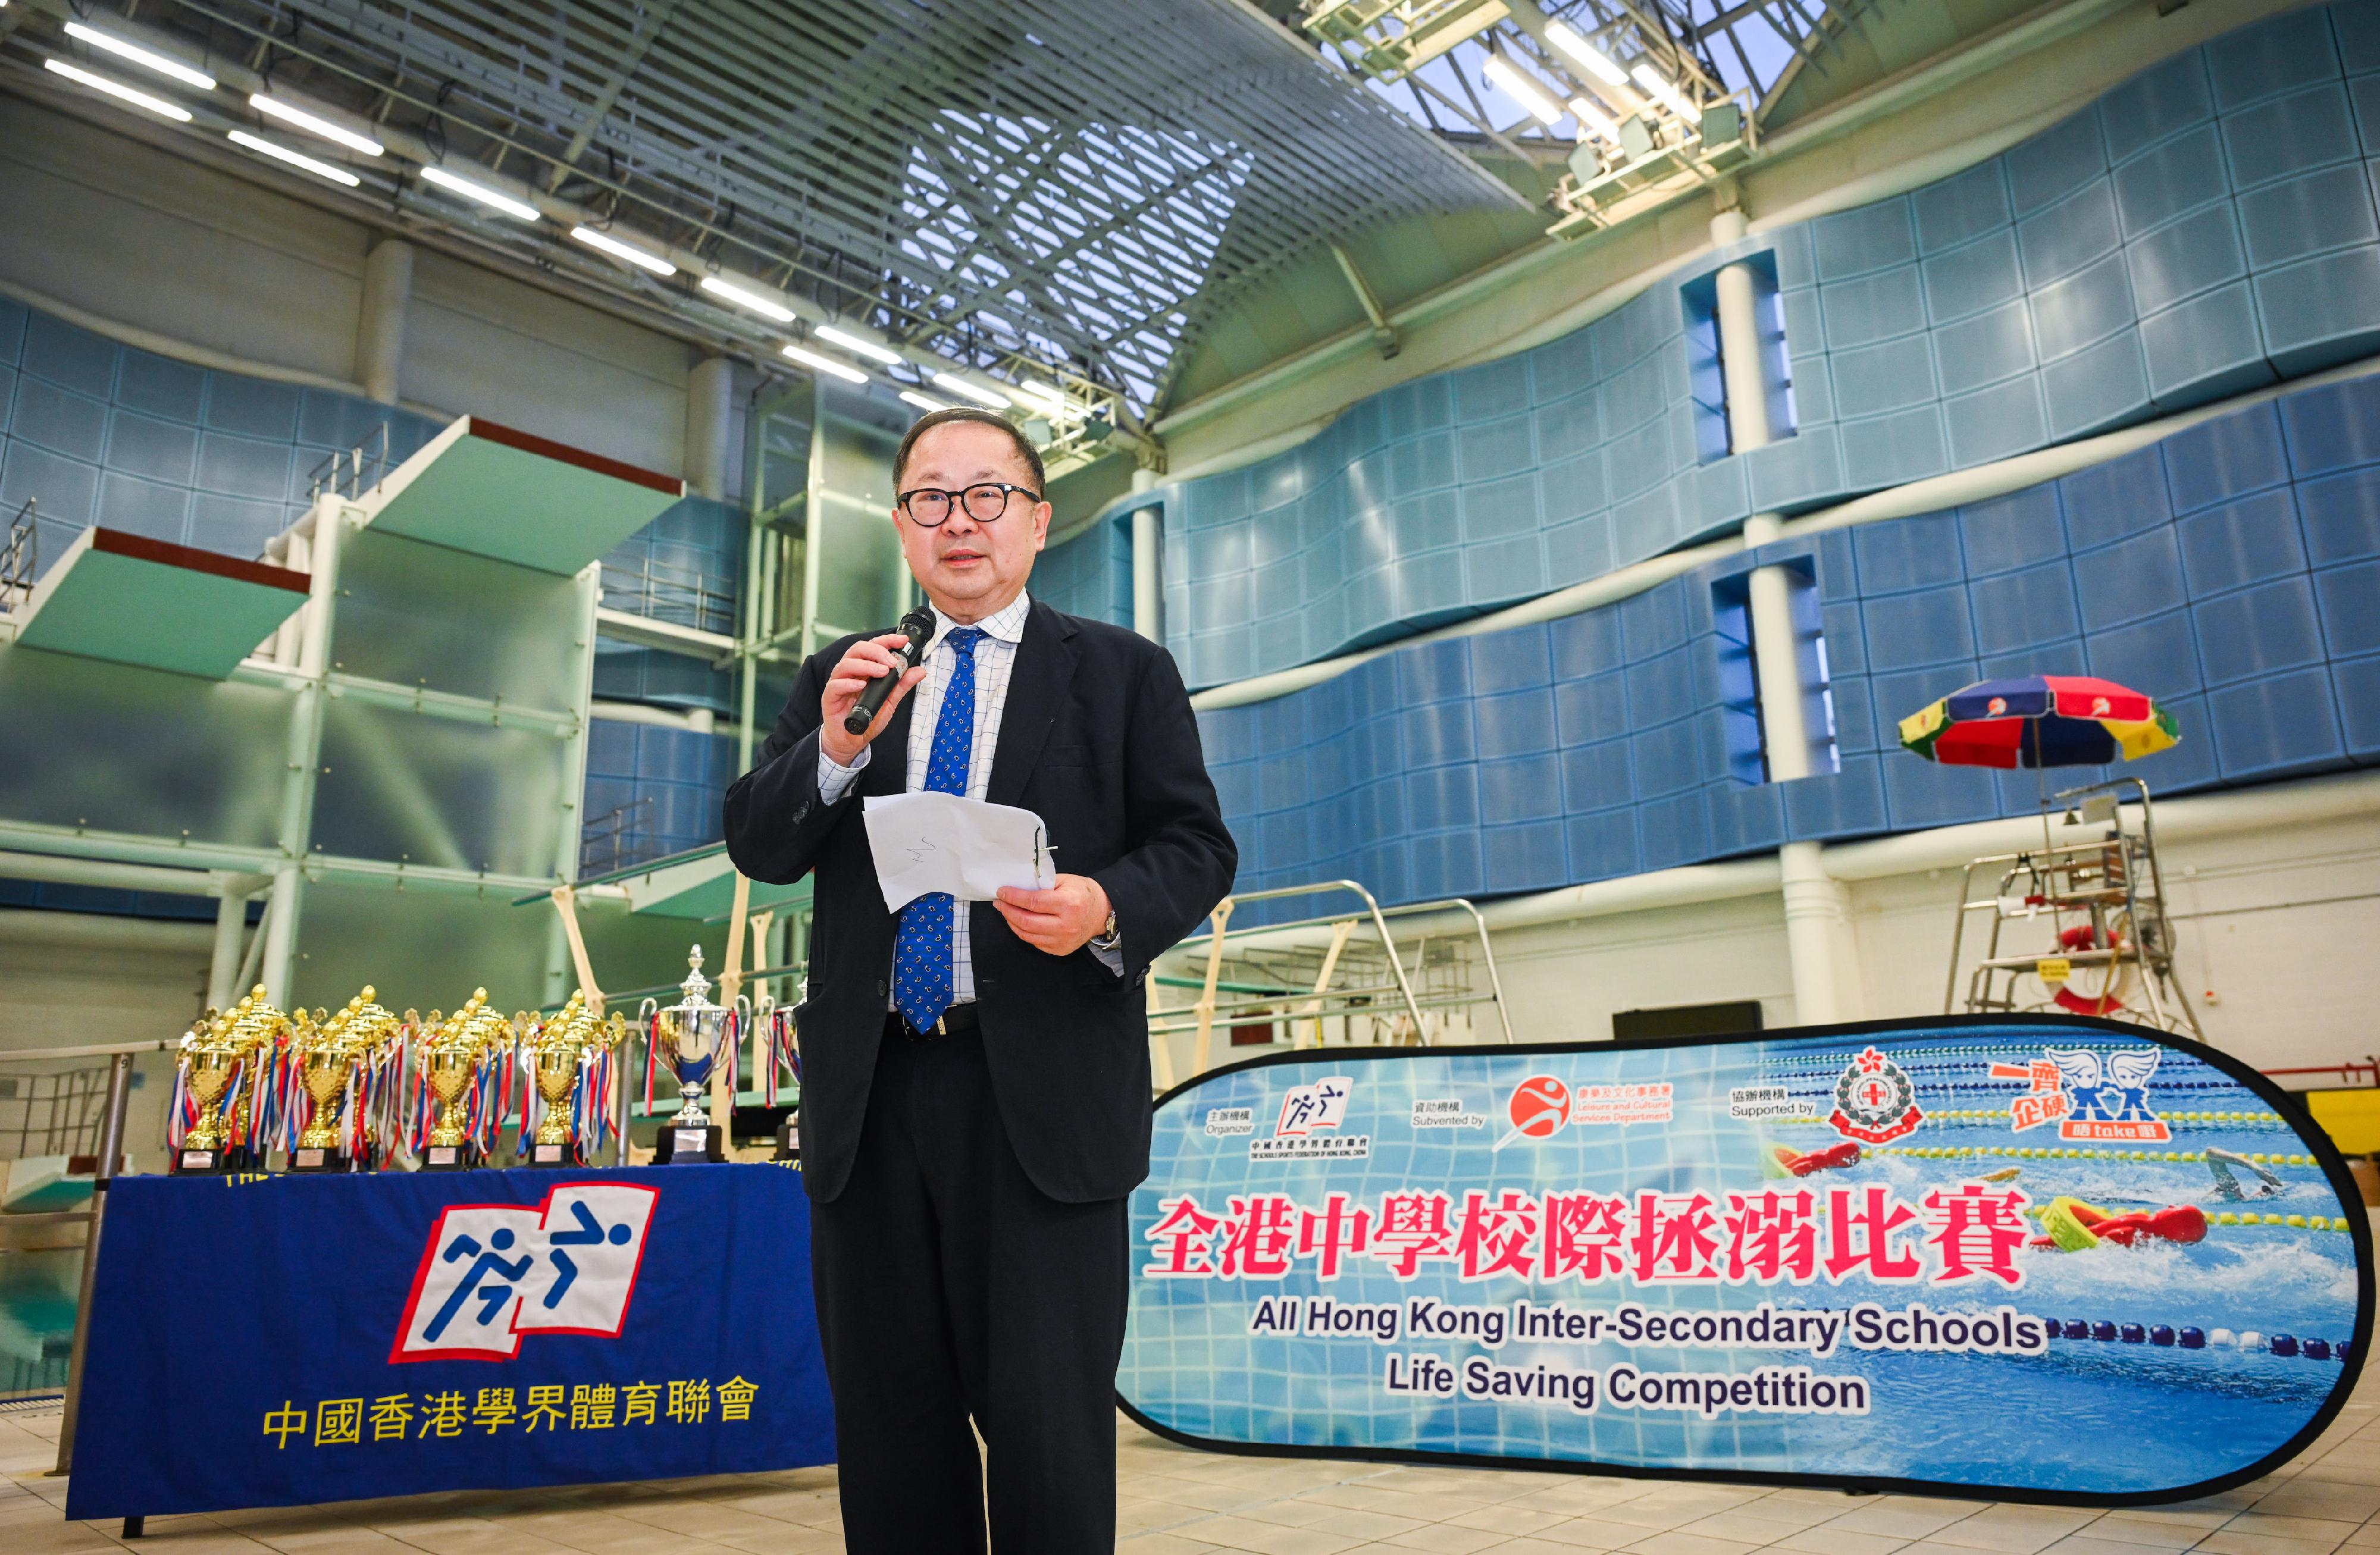 The Chairman of the Action Committee Against Narcotics, Dr Donald Li, presented prizes at the All Hong Kong Inter-Secondary Schools Life Saving Competition organised by the Schools Sports Federation of Hong Kong, China today (September 29) at the Kowloon Park Swimming Pool. Dr Li delivered a speech to call on concerted efforts from students to guard people around them, as well as to use their life-saving strength to rescue those in need and pull them from difficult situations.